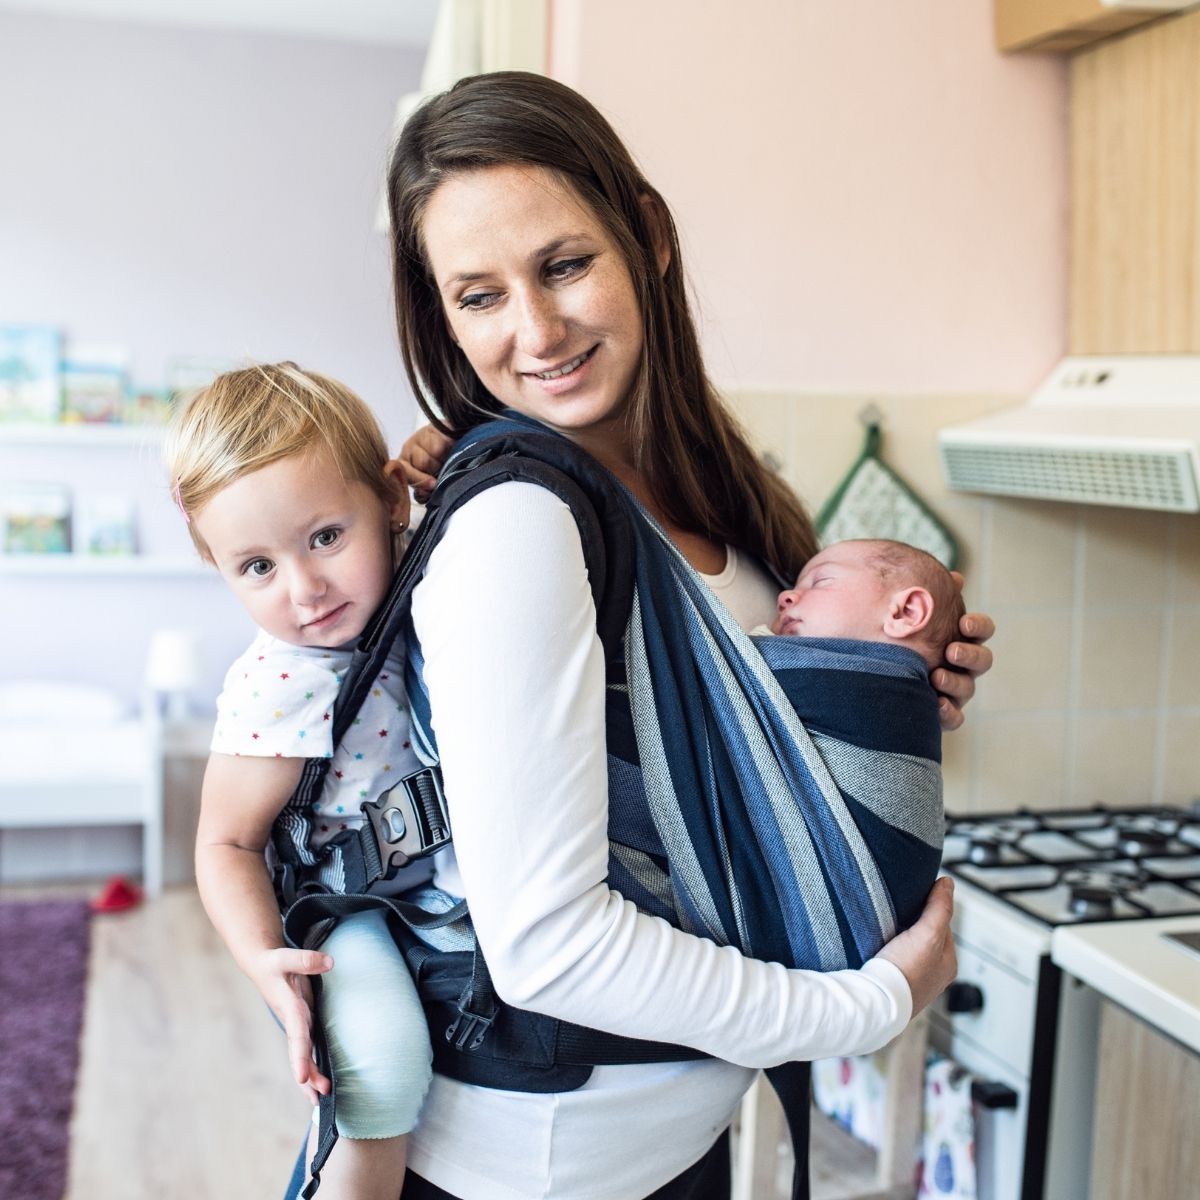 Mom wearing a baby and toddler in a sling and carrier.